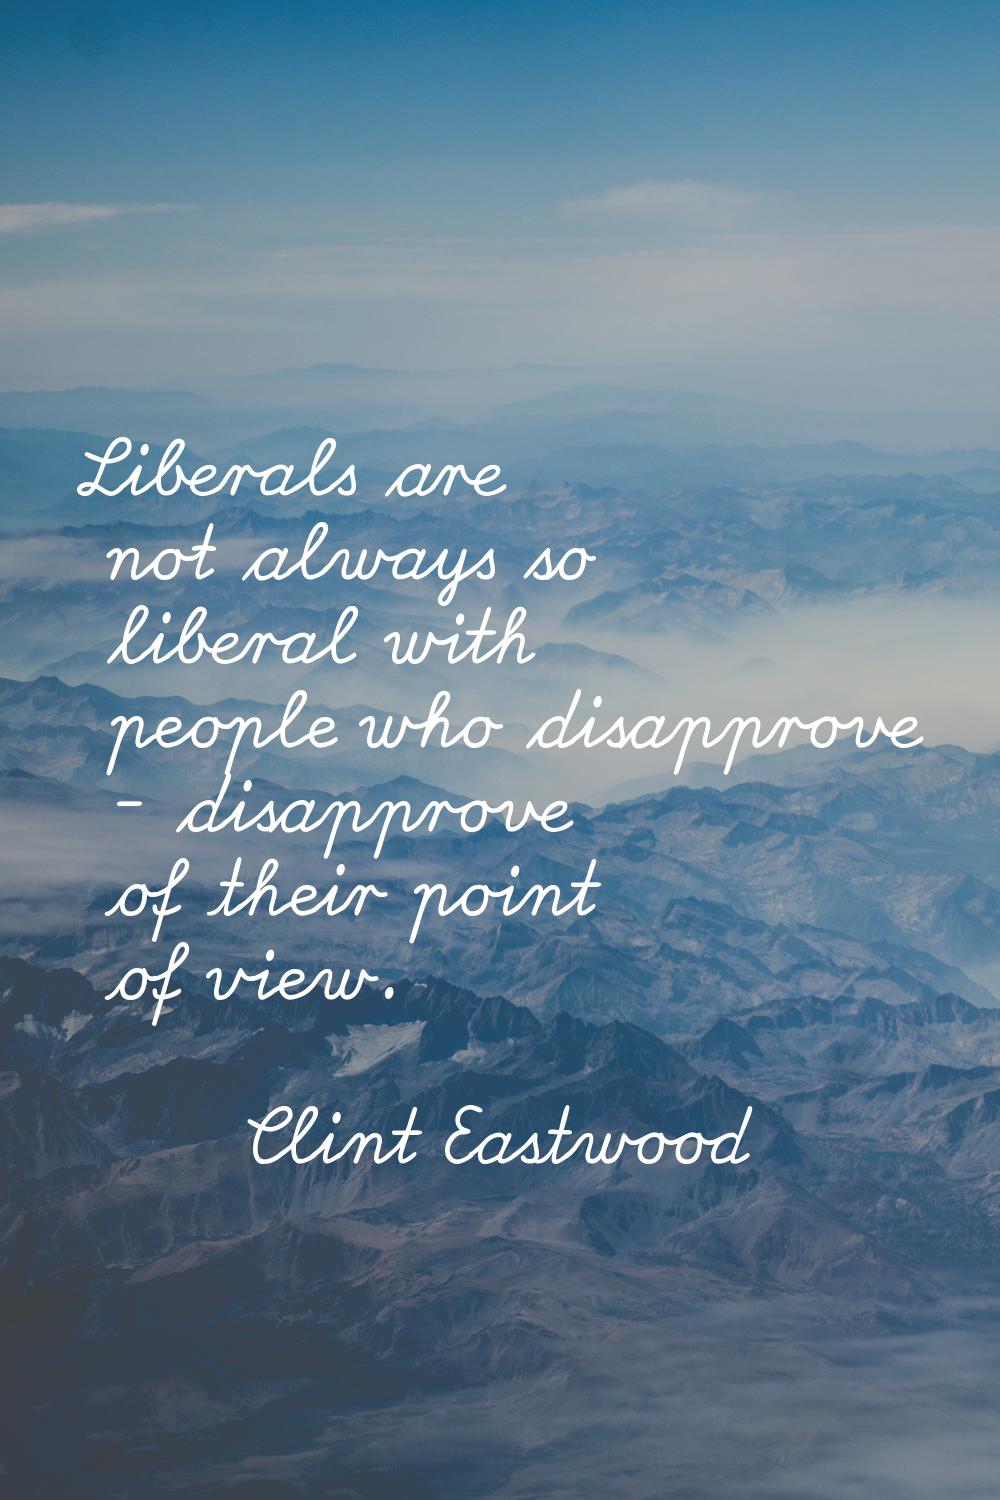 Liberals are not always so liberal with people who disapprove - disapprove of their point of view.